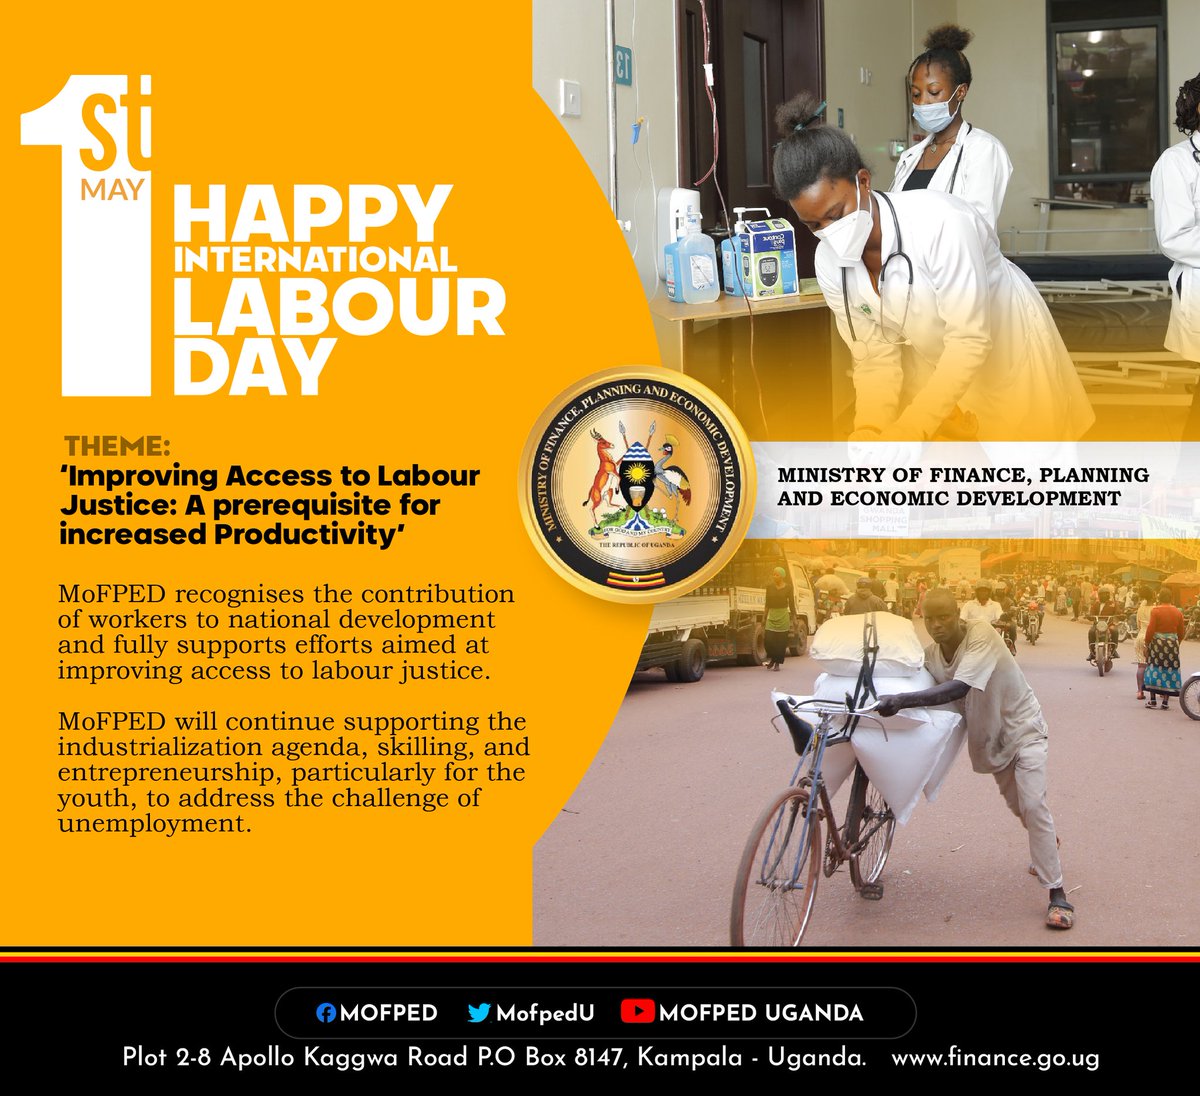 #HappyLabourDay to all diligently serving others and provision of services to the nation.